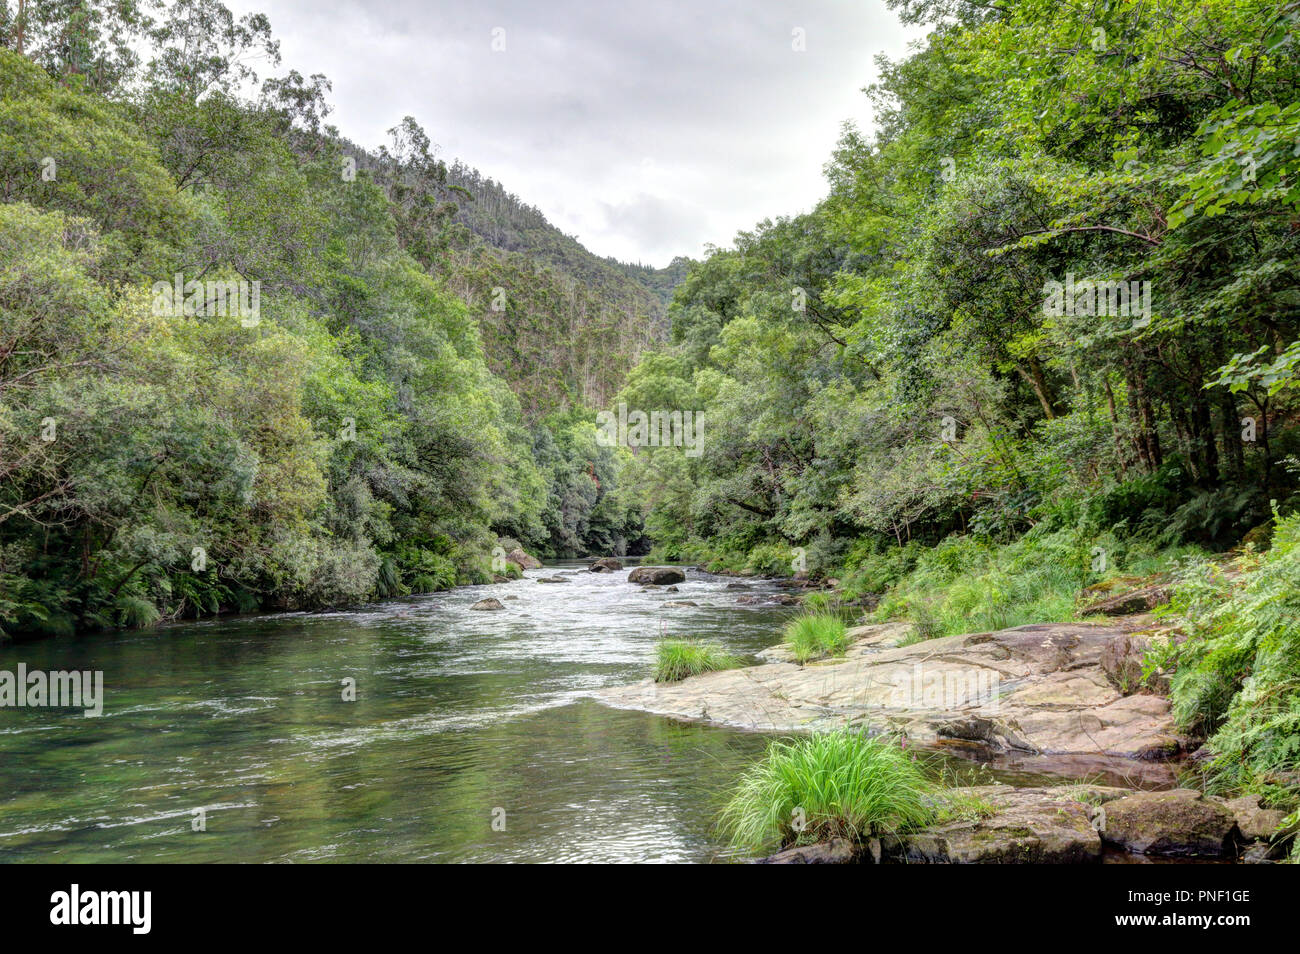 A landscape of the clear waters of the Eume river in a green dense thick forest, on the way to the Caaveiro Monastery, in Galicia, Spain Stock Photo